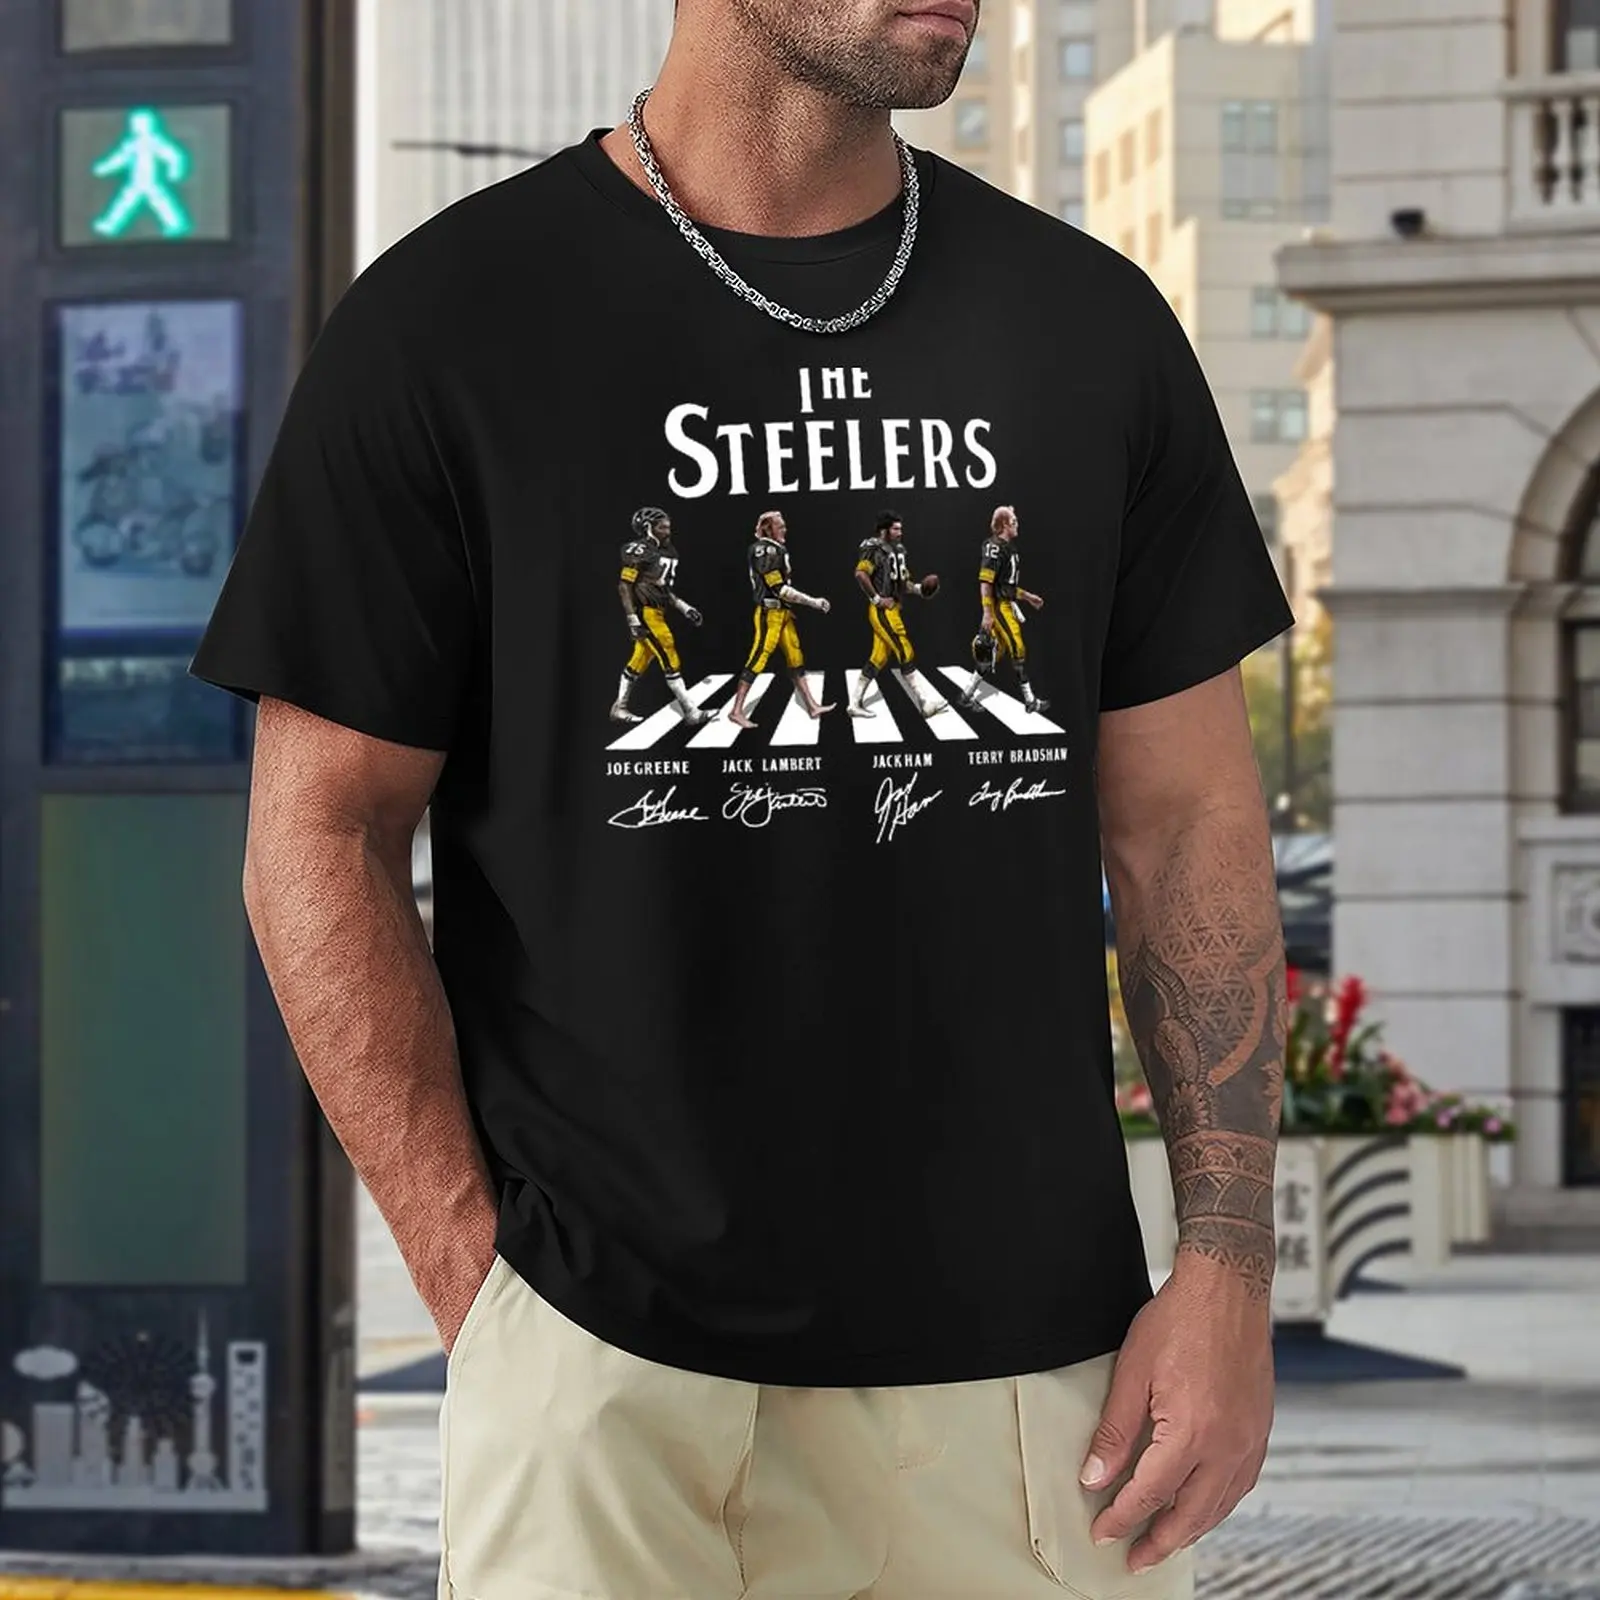 The-Steelers-Abbey-Road T-Shirt anime clothes Short sleeve plain t shirts  men